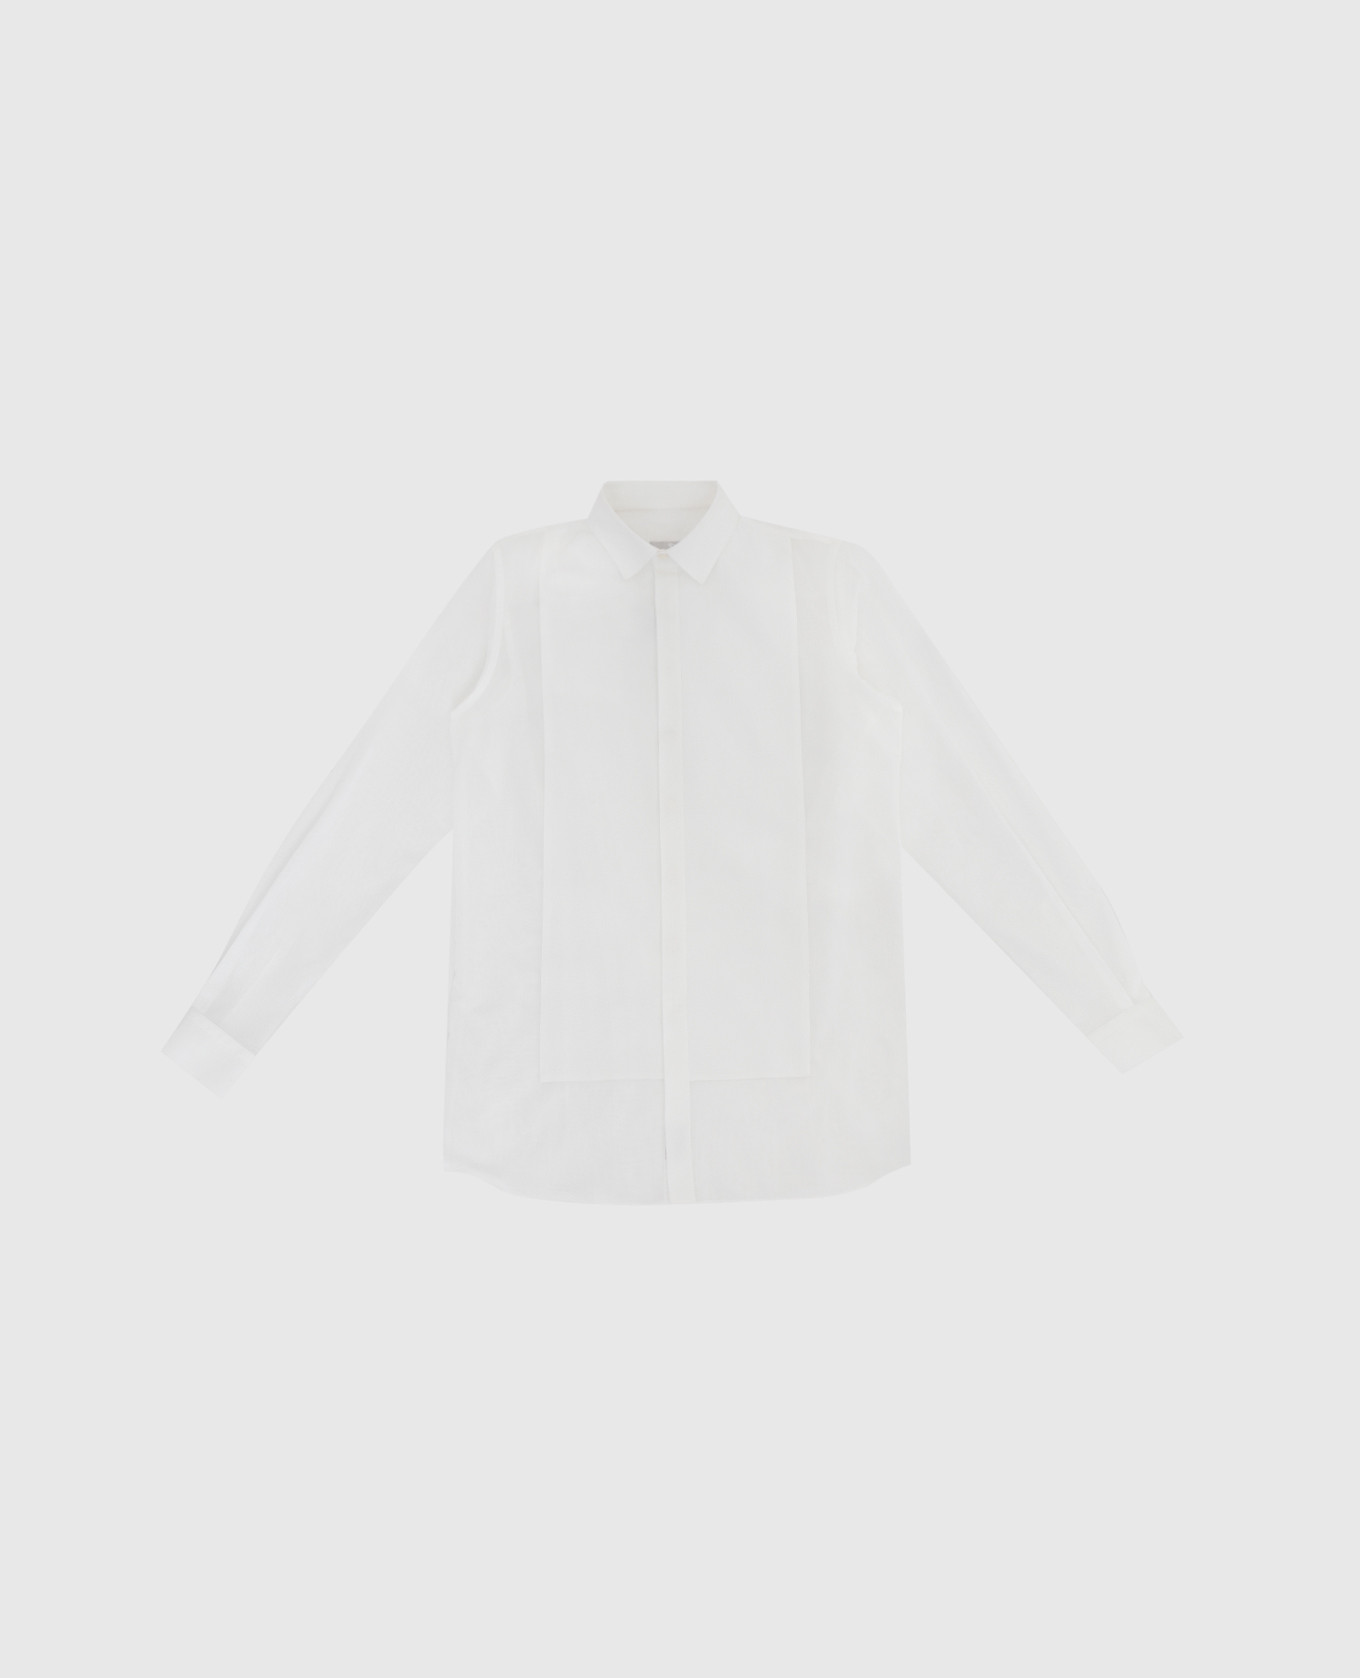 Children's white shirt with a pattern